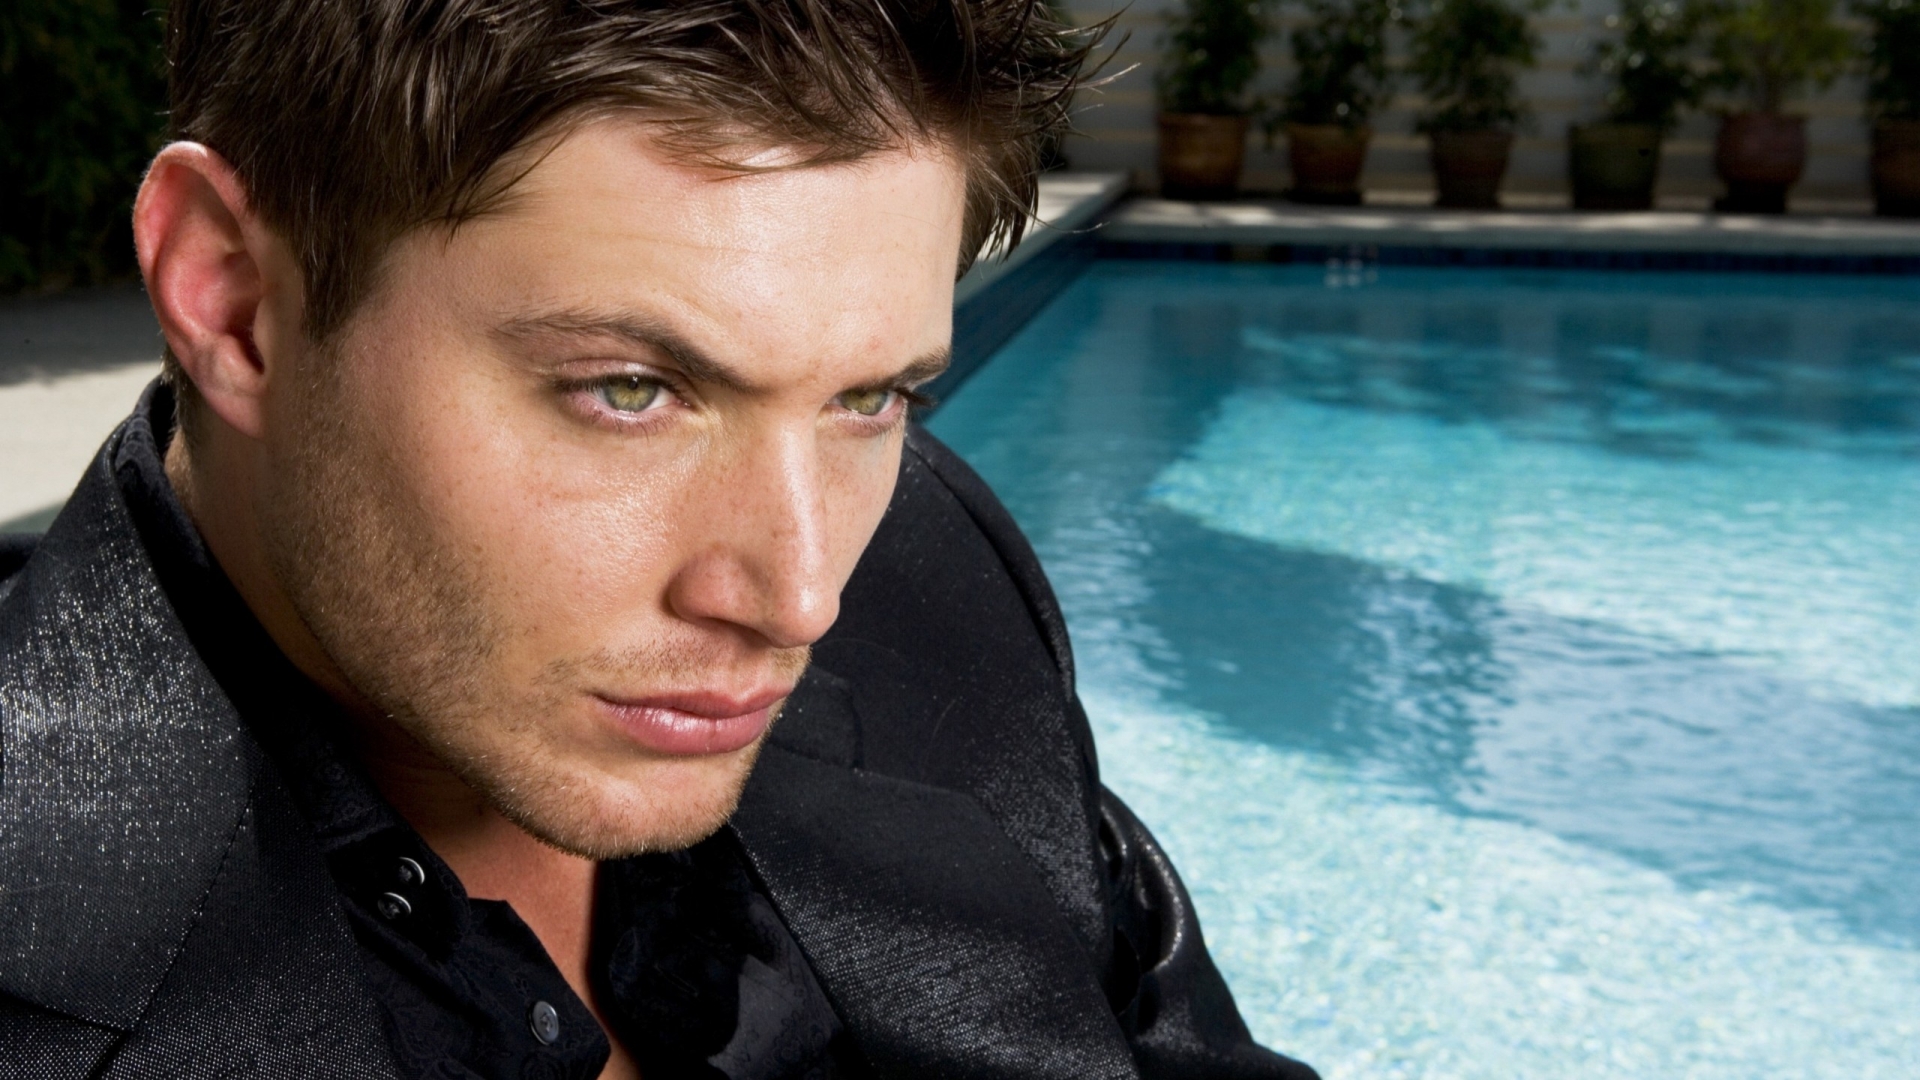 Jensen Ackles Profile Look for 1920 x 1080 HDTV 1080p resolution